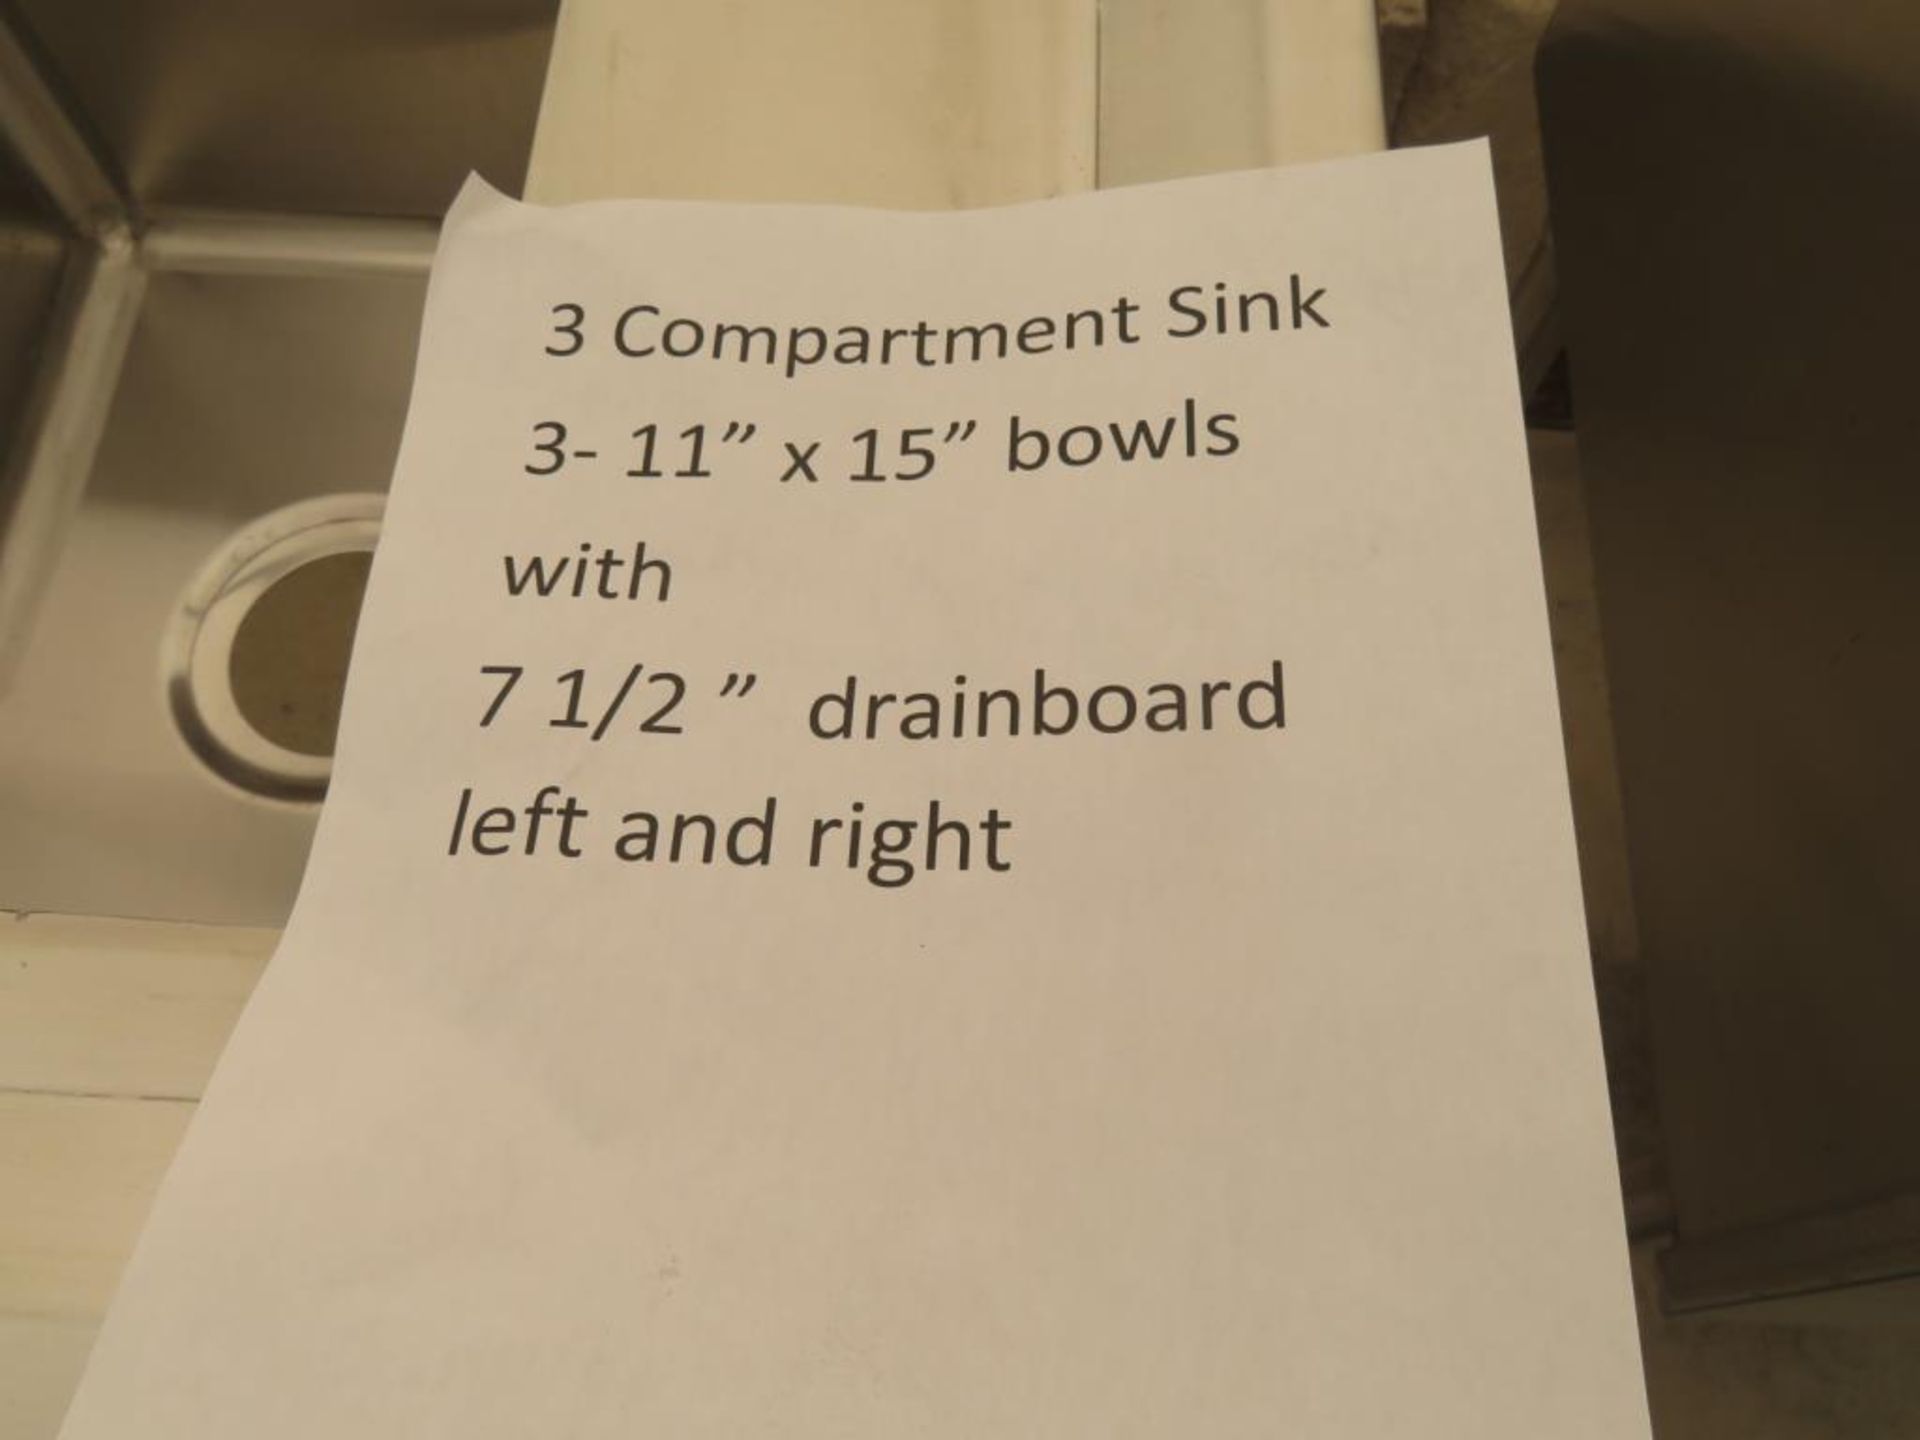 3 compartment sink, 3-11 - Image 2 of 2